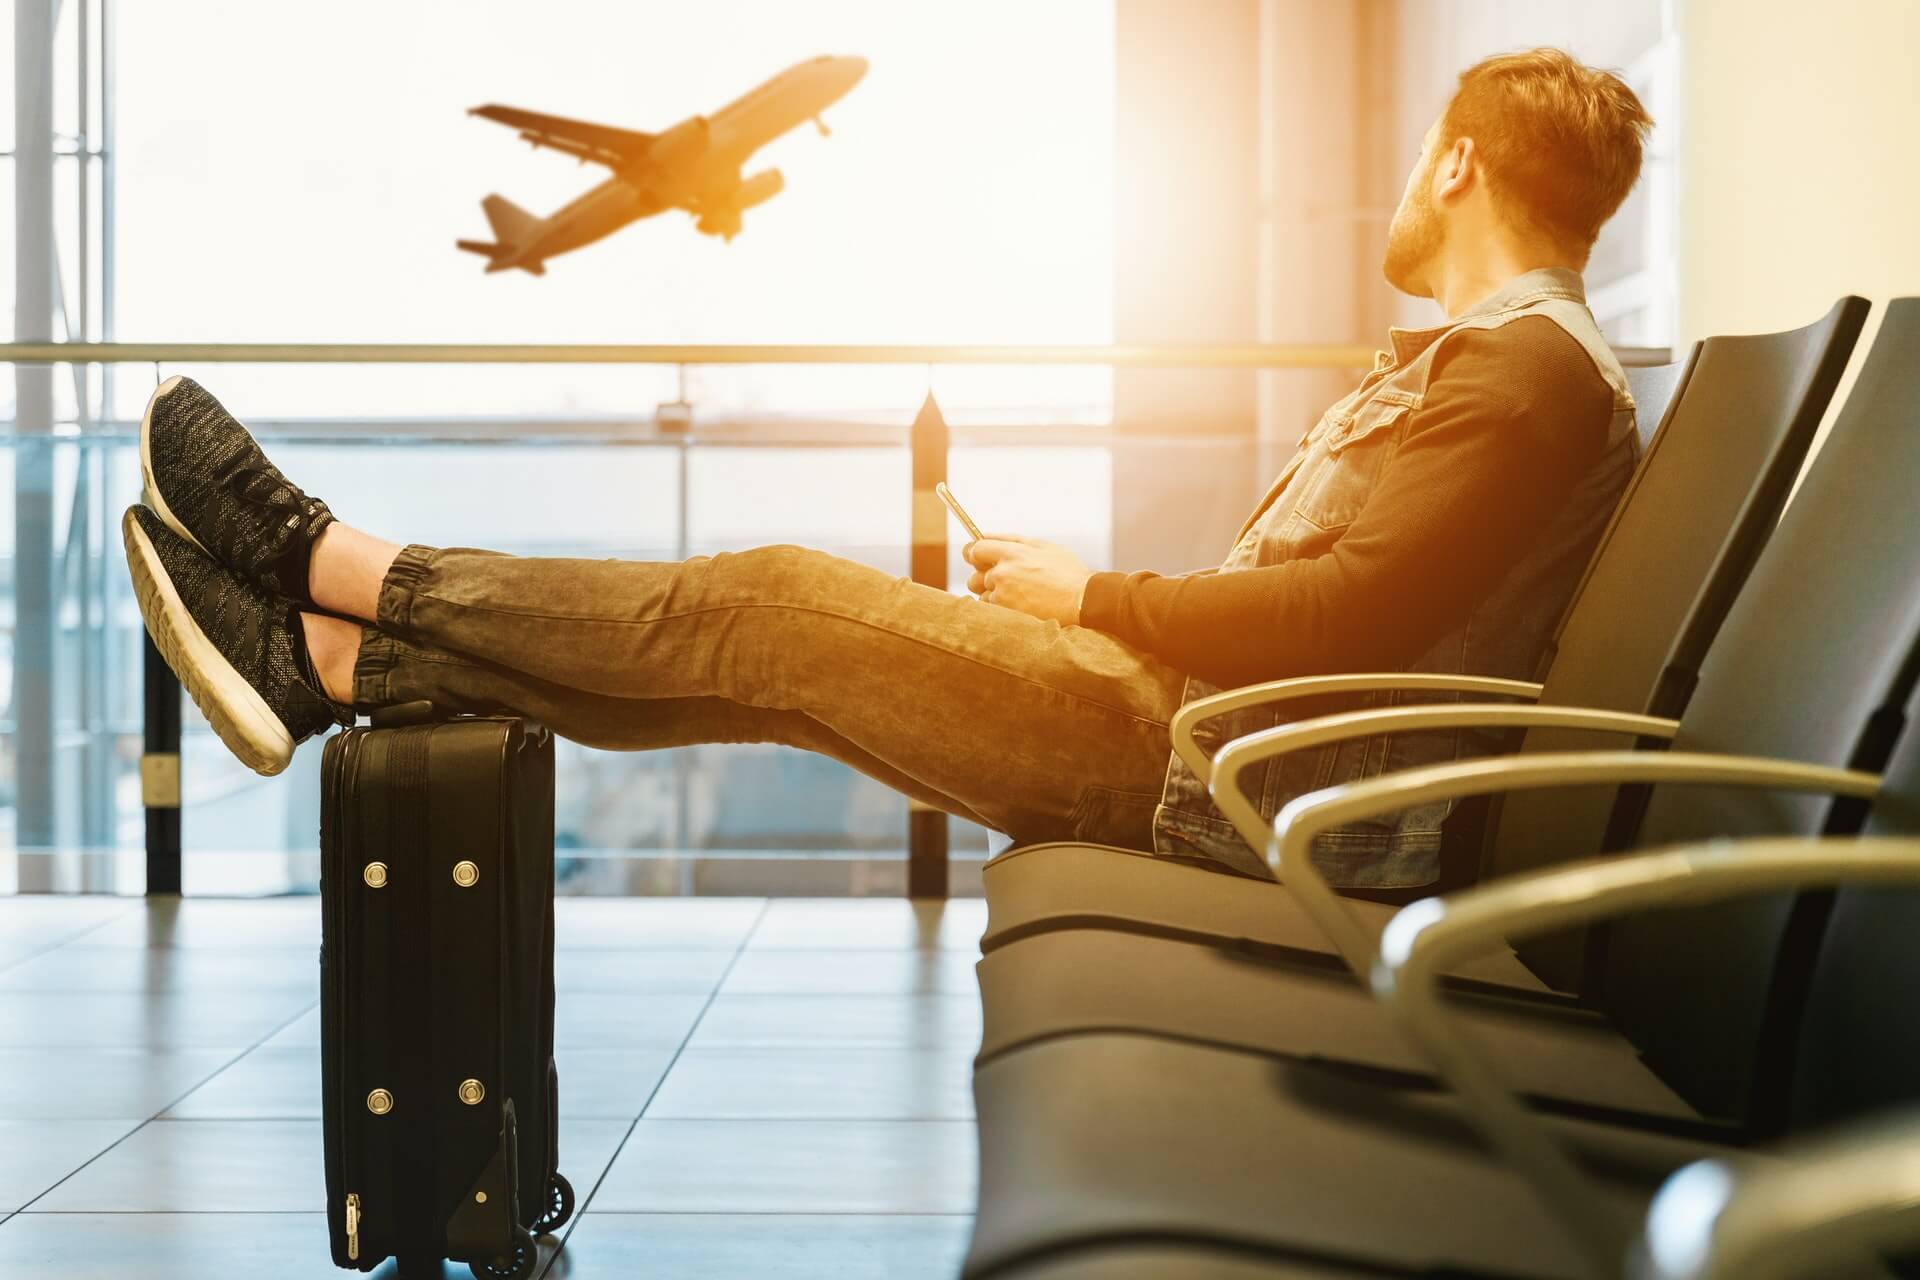 11 Ways Airlines Could Improve Travel Experience For Passengers, According To AI